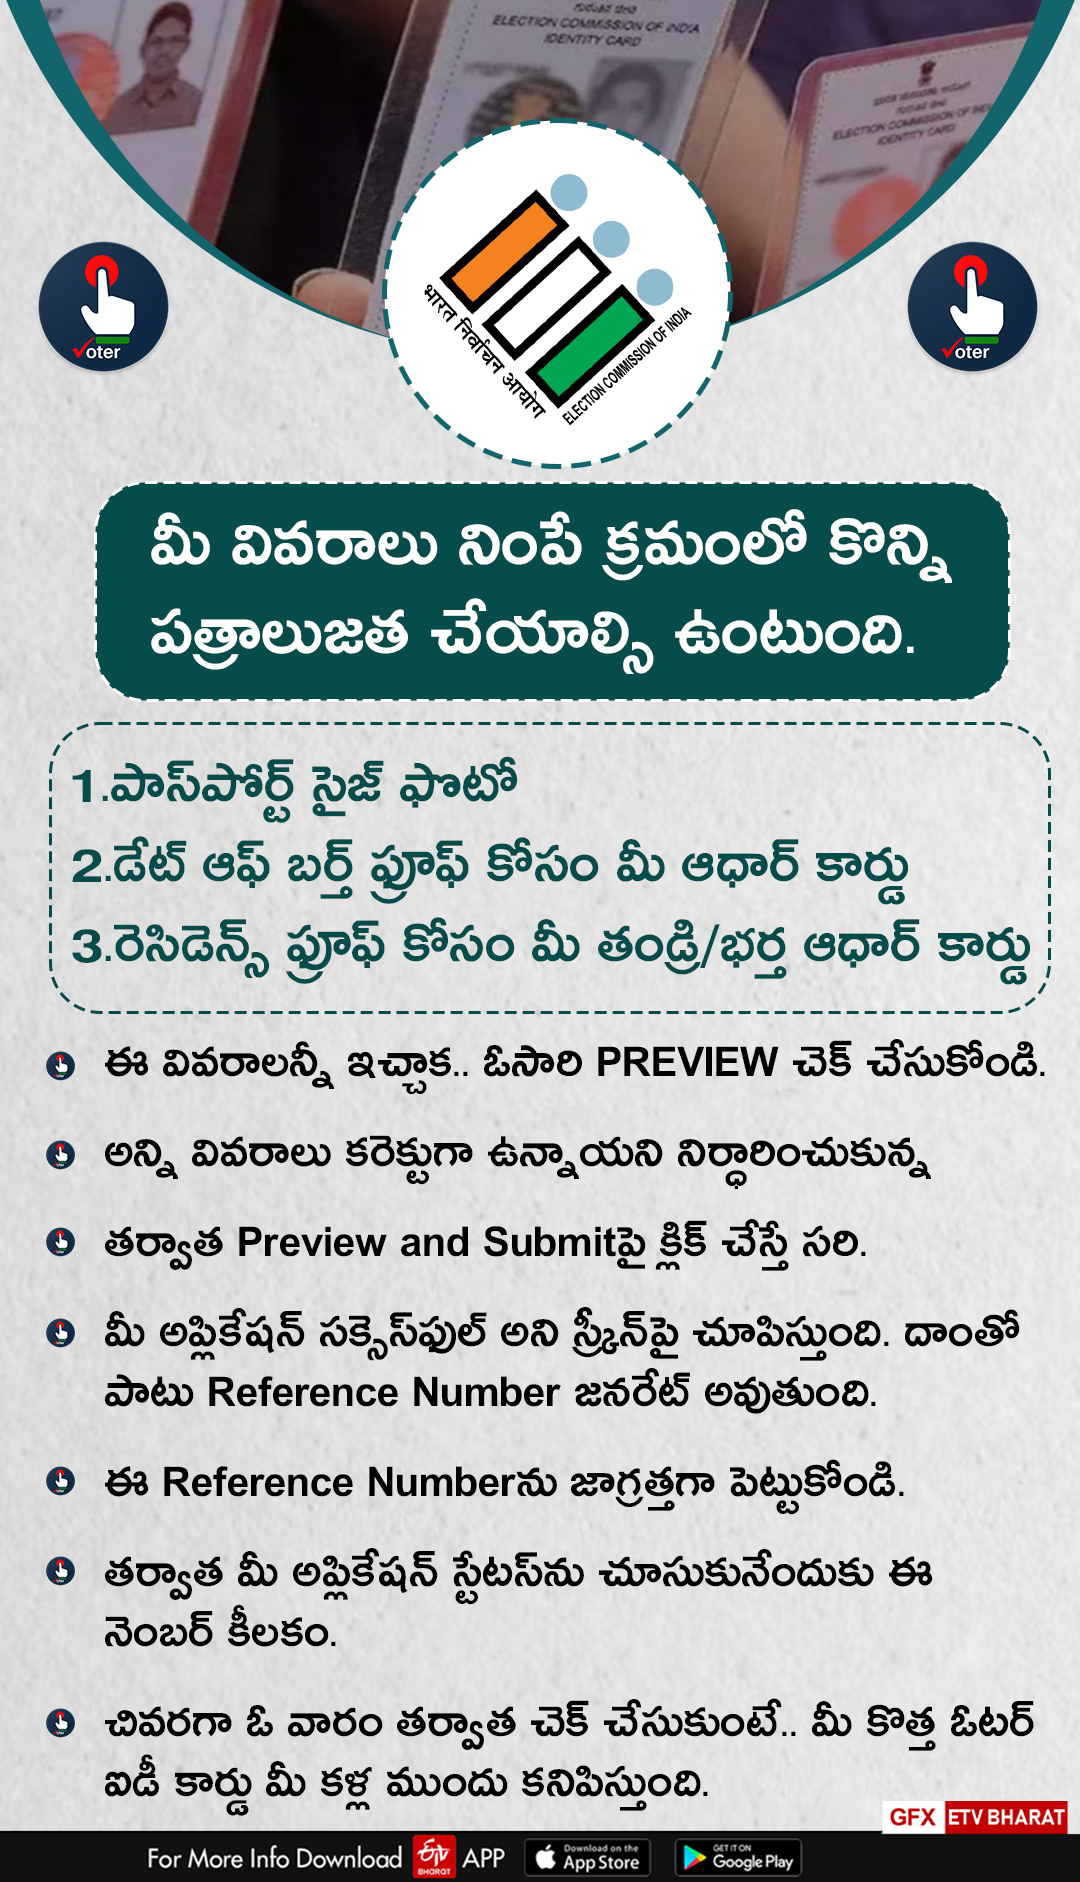 New Voter ID Application in telugu